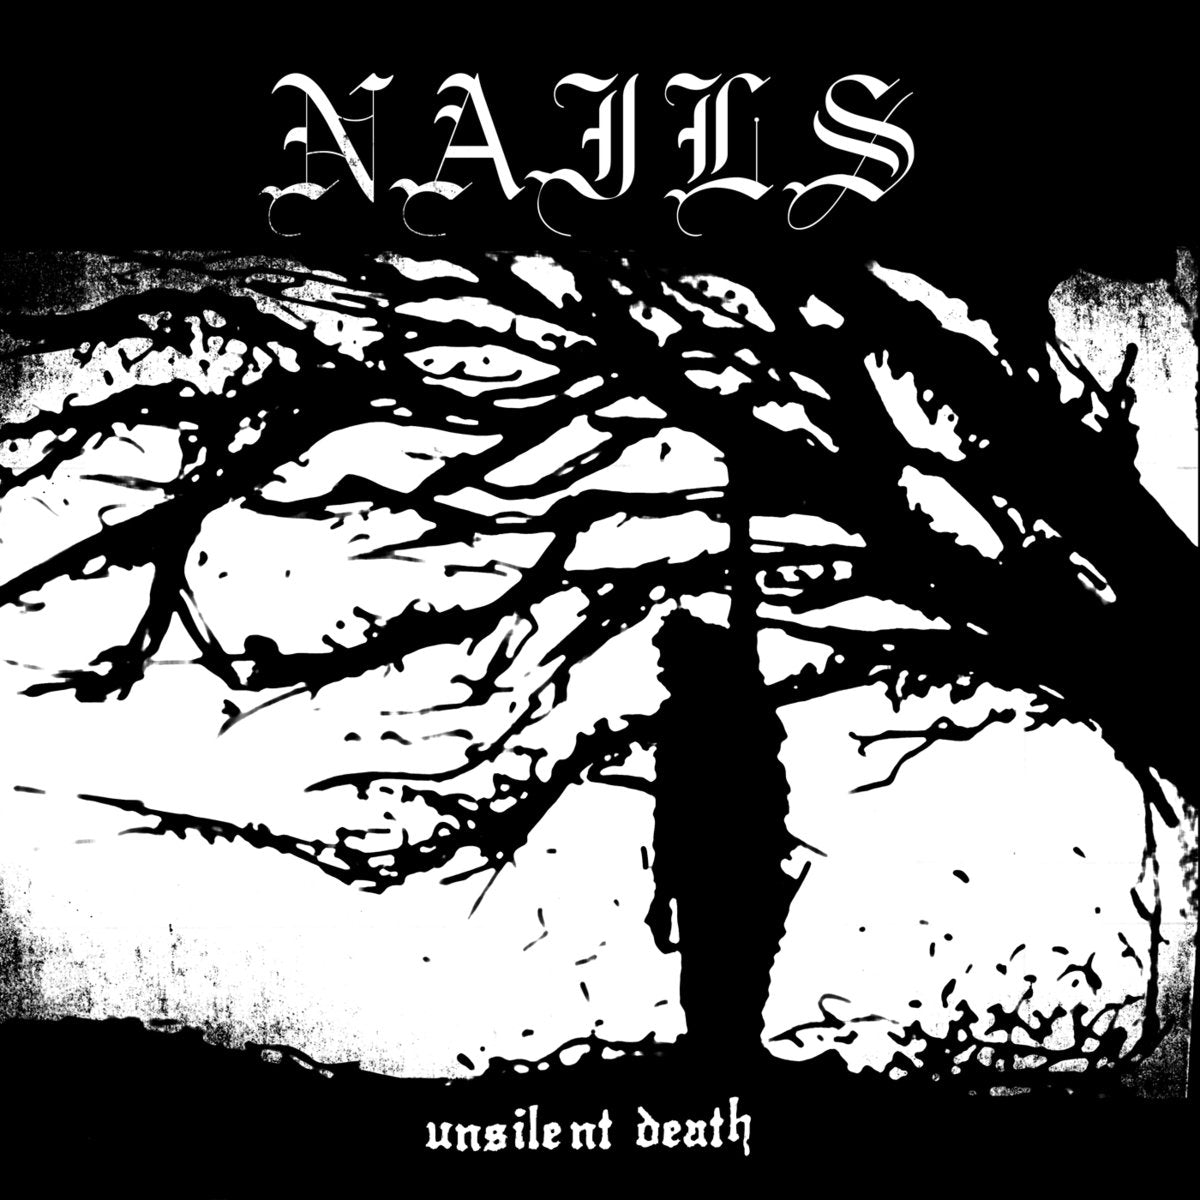 NAILS "Unsilent Death - 10th Anniversary Edition" CD